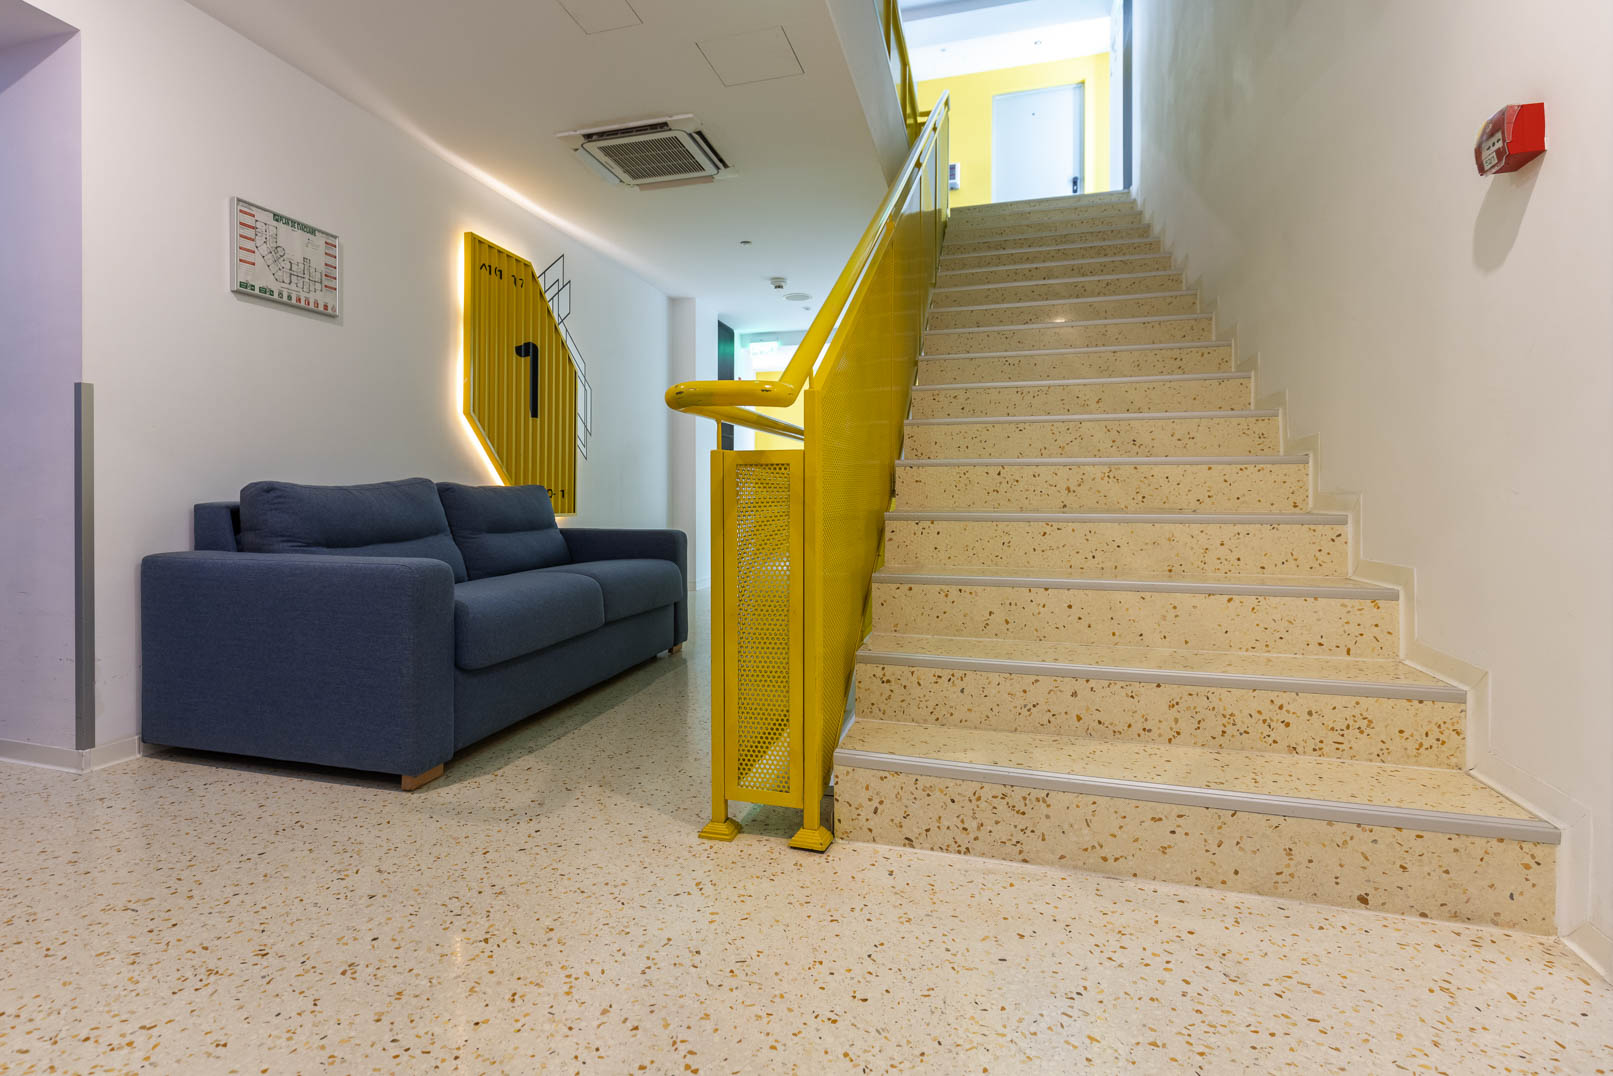 terrazzo stairs and flooring in a hotel lobby